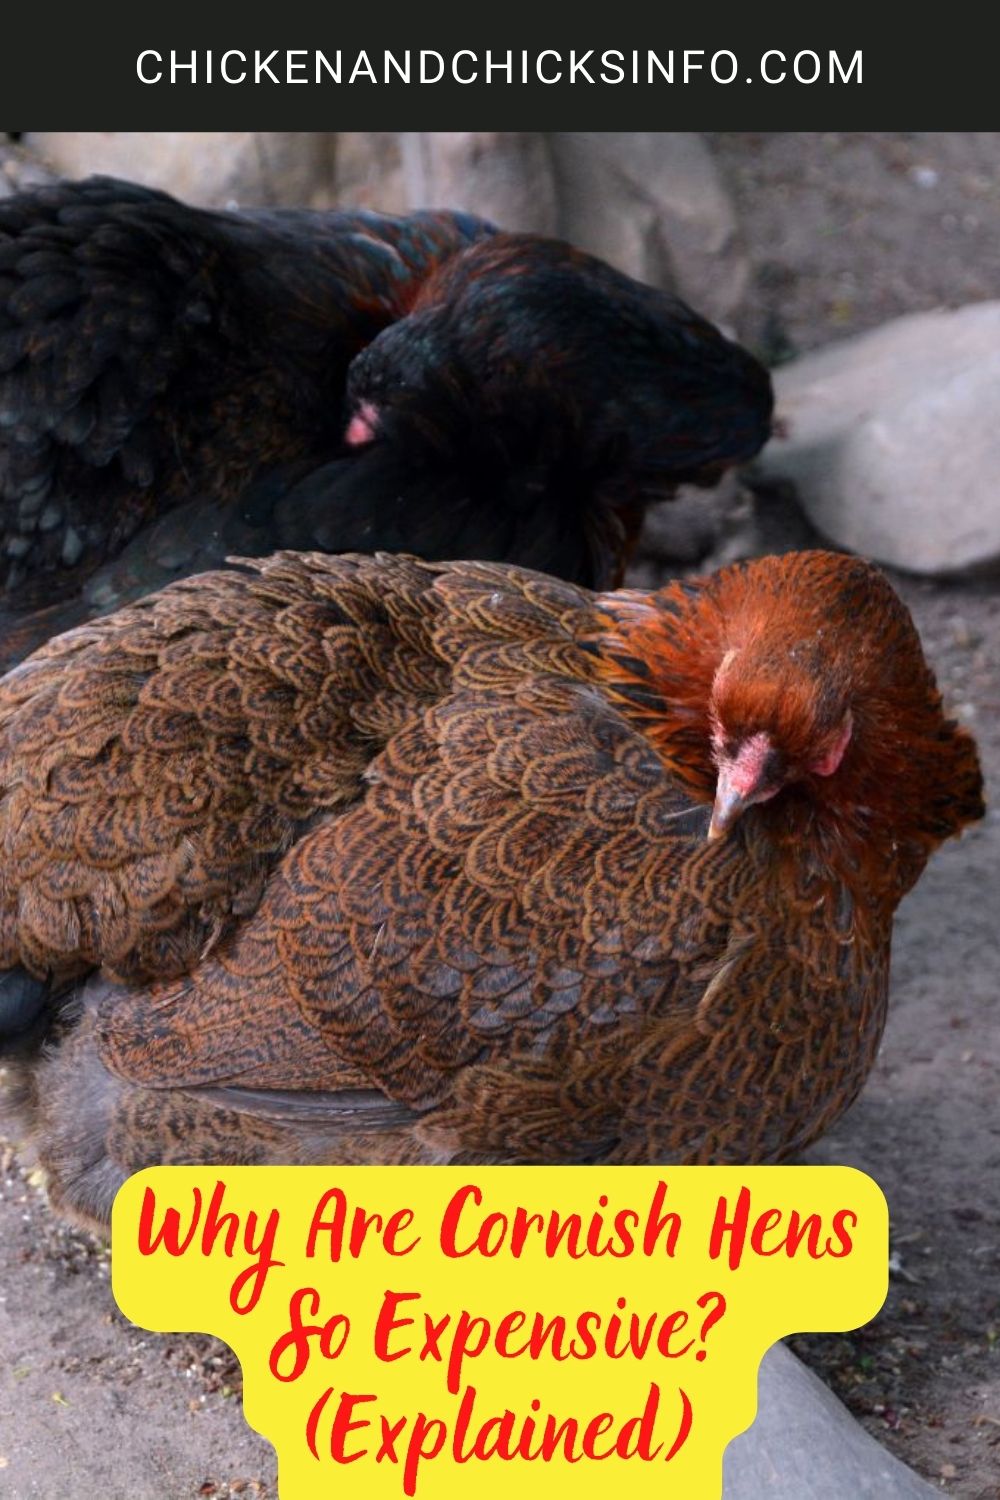 Why Are Cornish Hens So Expensive? (Explained) poster.
